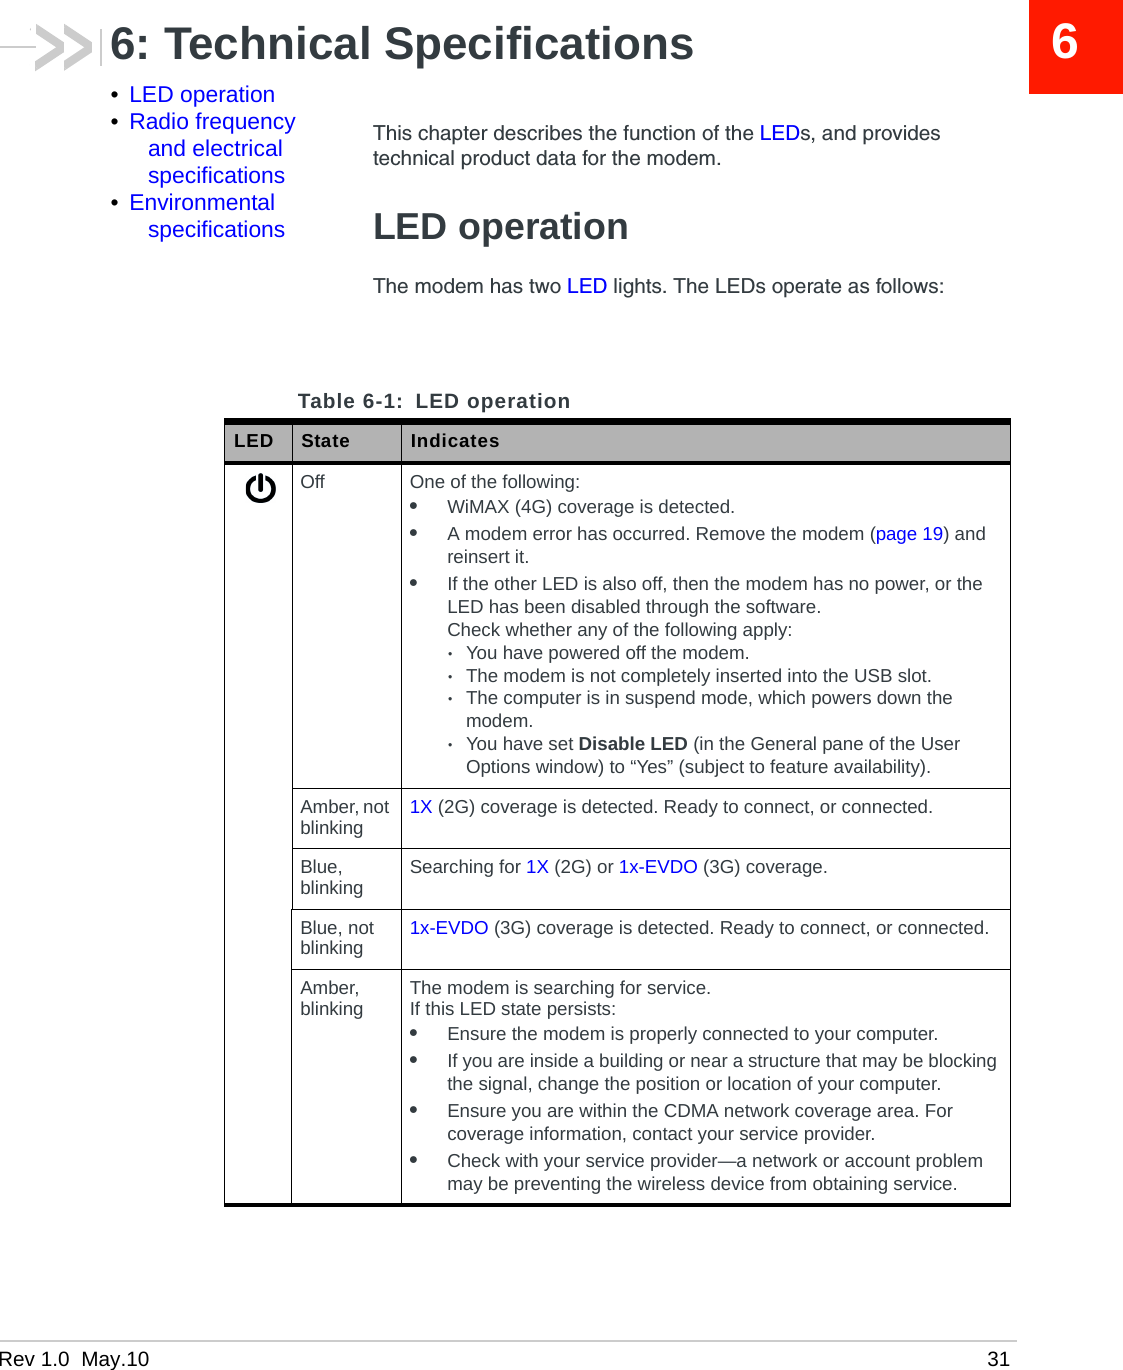 Rev 1.0  May.10 3166: Technical Specifications•LED operation•Radio frequency and electrical specifications•Environmental specificationsThis chapter describes the function of the LEDs, and provides technical product data for the modem.LED operationThe modem has two LED lights. The LEDs operate as follows:Table 6-1: LED operationLED State IndicatesOff One of the following:•WiMAX (4G) coverage is detected.•A modem error has occurred. Remove the modem (page 19) and reinsert it.•If the other LED is also off, then the modem has no power, or the LED has been disabled through the software.Check whether any of the following apply:·You have powered off the modem.·The modem is not completely inserted into the USB slot.·The computer is in suspend mode, which powers down the modem.·You have set Disable LED (in the General pane of the User Options window) to “Yes” (subject to feature availability).Amber, not blinking 1X (2G) coverage is detected. Ready to connect, or connected.Blue,  blinking Searching for 1X (2G) or 1x-EVDO (3G) coverage.Blue, not blinking 1x-EVDO (3G) coverage is detected. Ready to connect, or connected.Amber, blinking The modem is searching for service.If this LED state persists:•Ensure the modem is properly connected to your computer.•If you are inside a building or near a structure that may be blocking the signal, change the position or location of your computer.•Ensure you are within the CDMA network coverage area. For coverage information, contact your service provider.•Check with your service provider—a network or account problem may be preventing the wireless device from obtaining service.